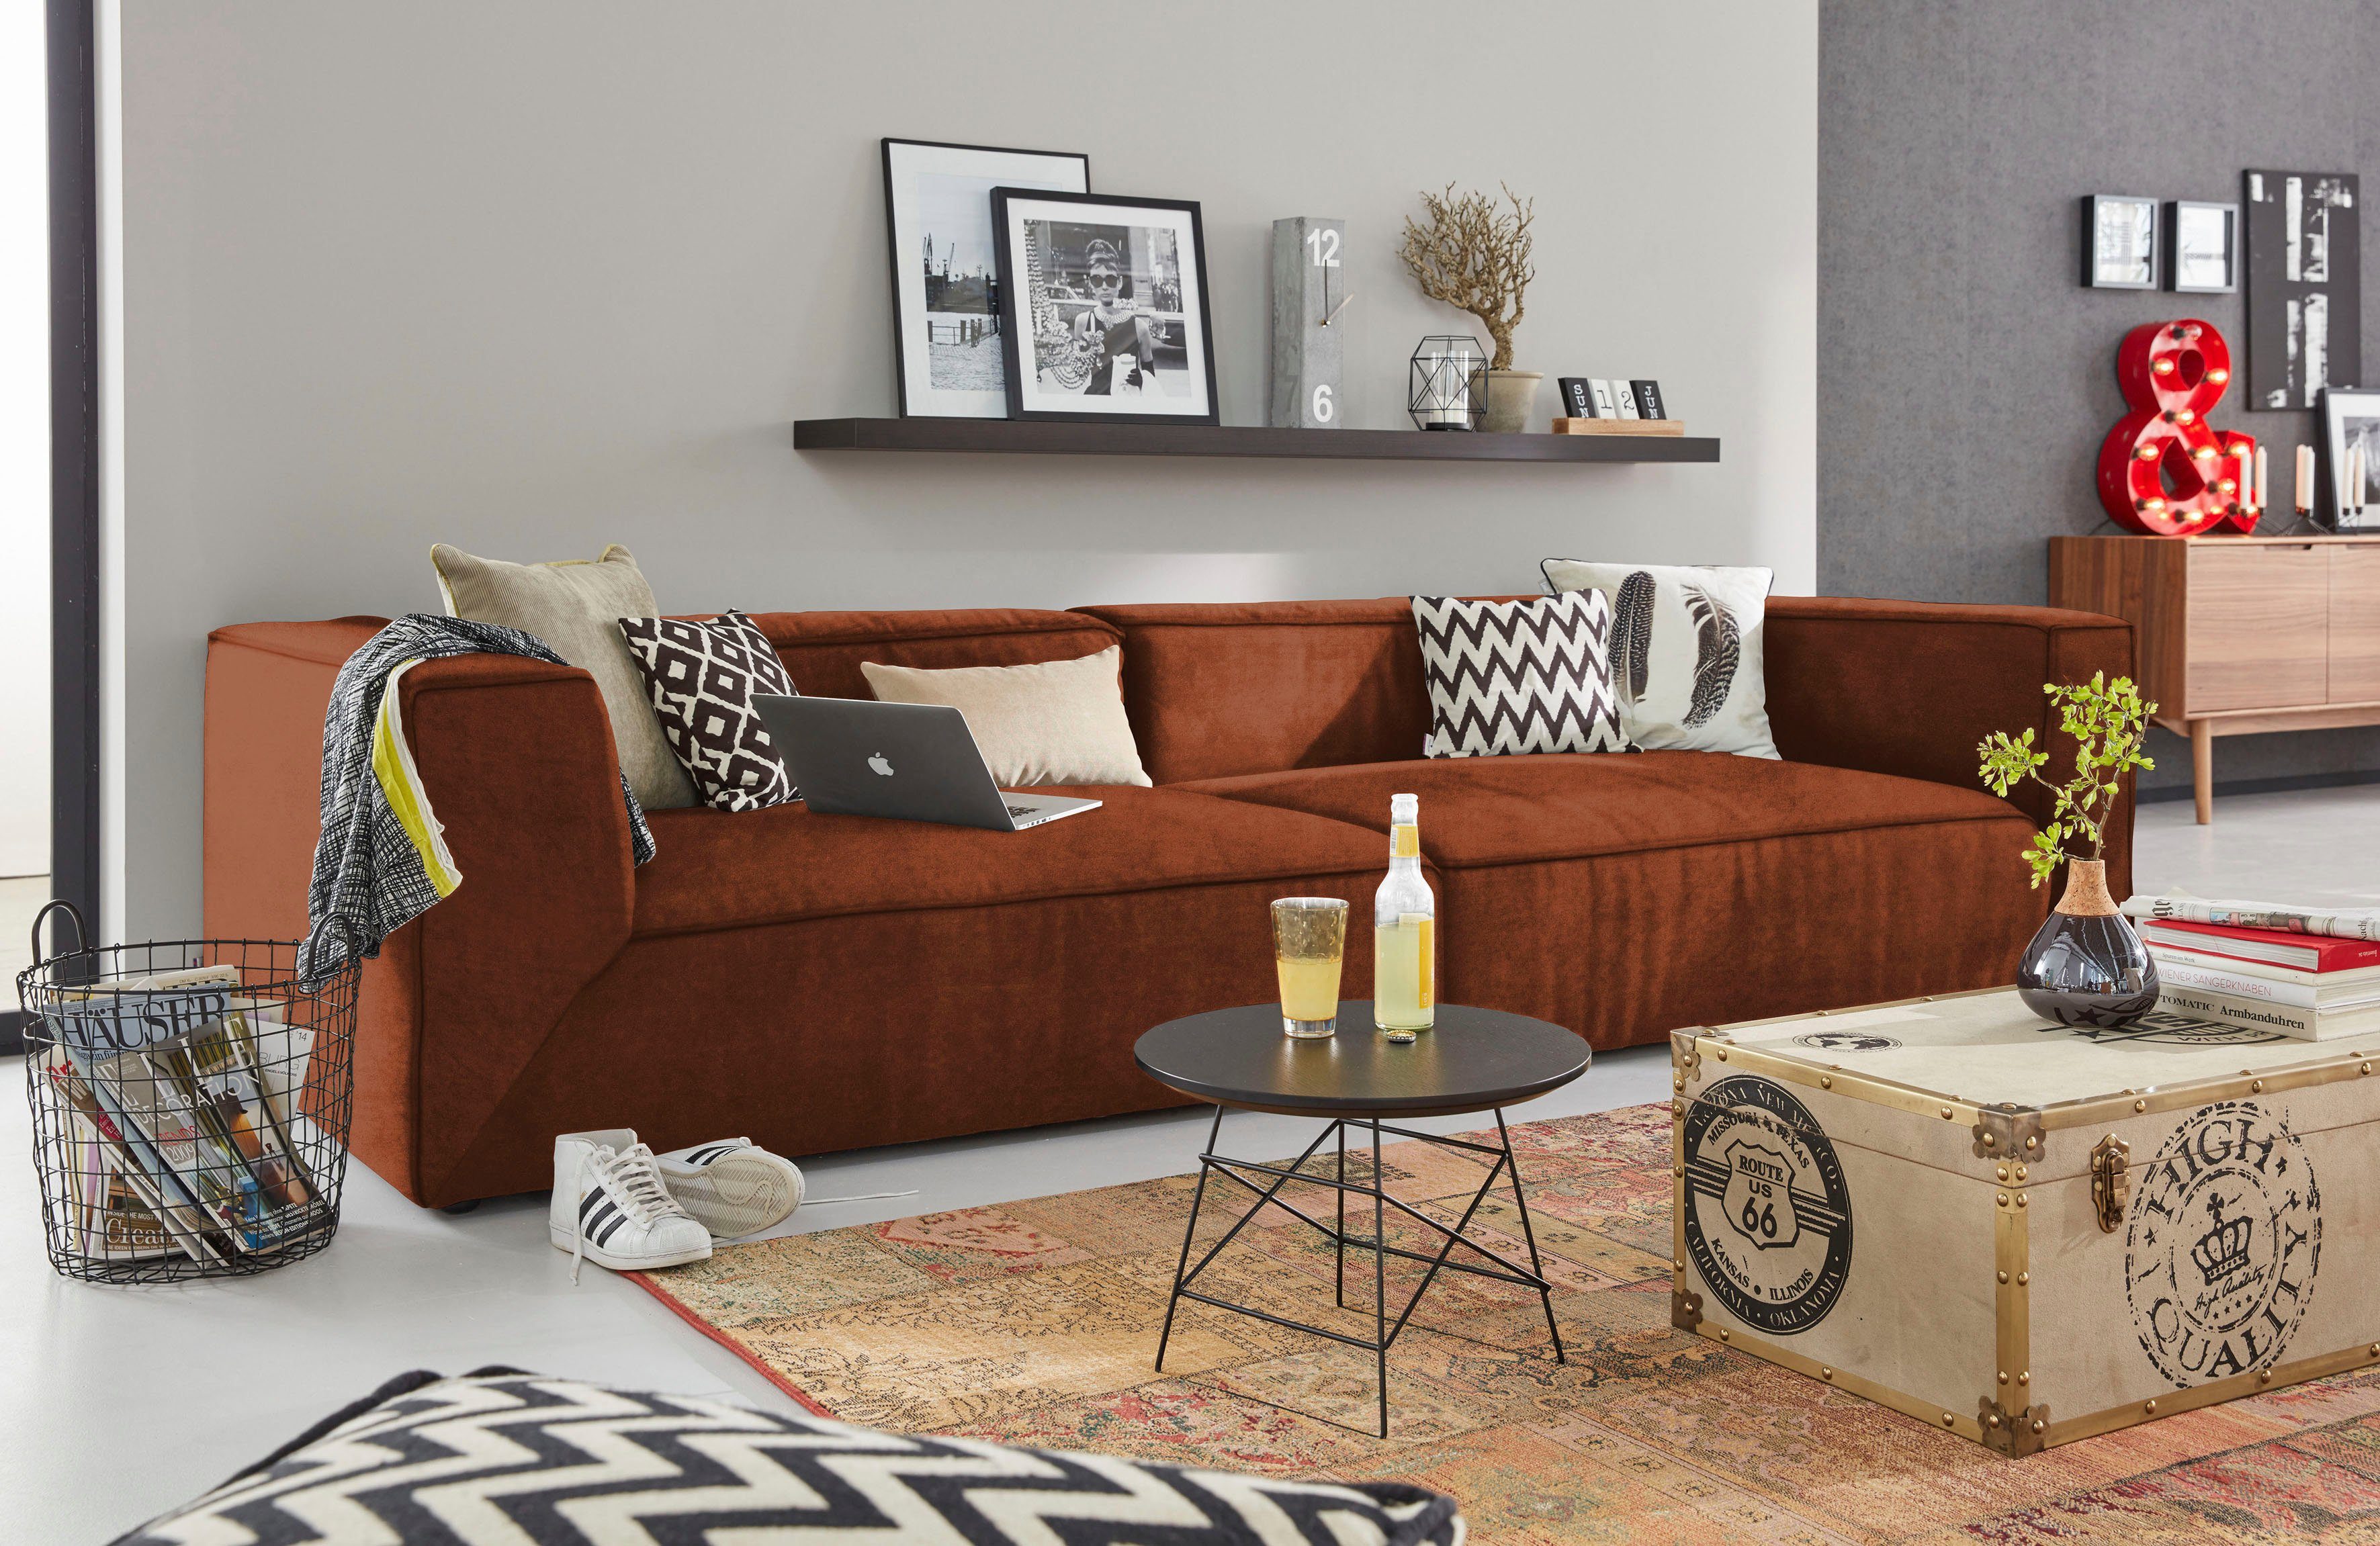 122 Tiefe in TOM BIG TOM HOME CUBE<<, Big-Sofa TAILOR >>BIG CUBE, Big-Sofa 3 cm TAILOR Breiten,